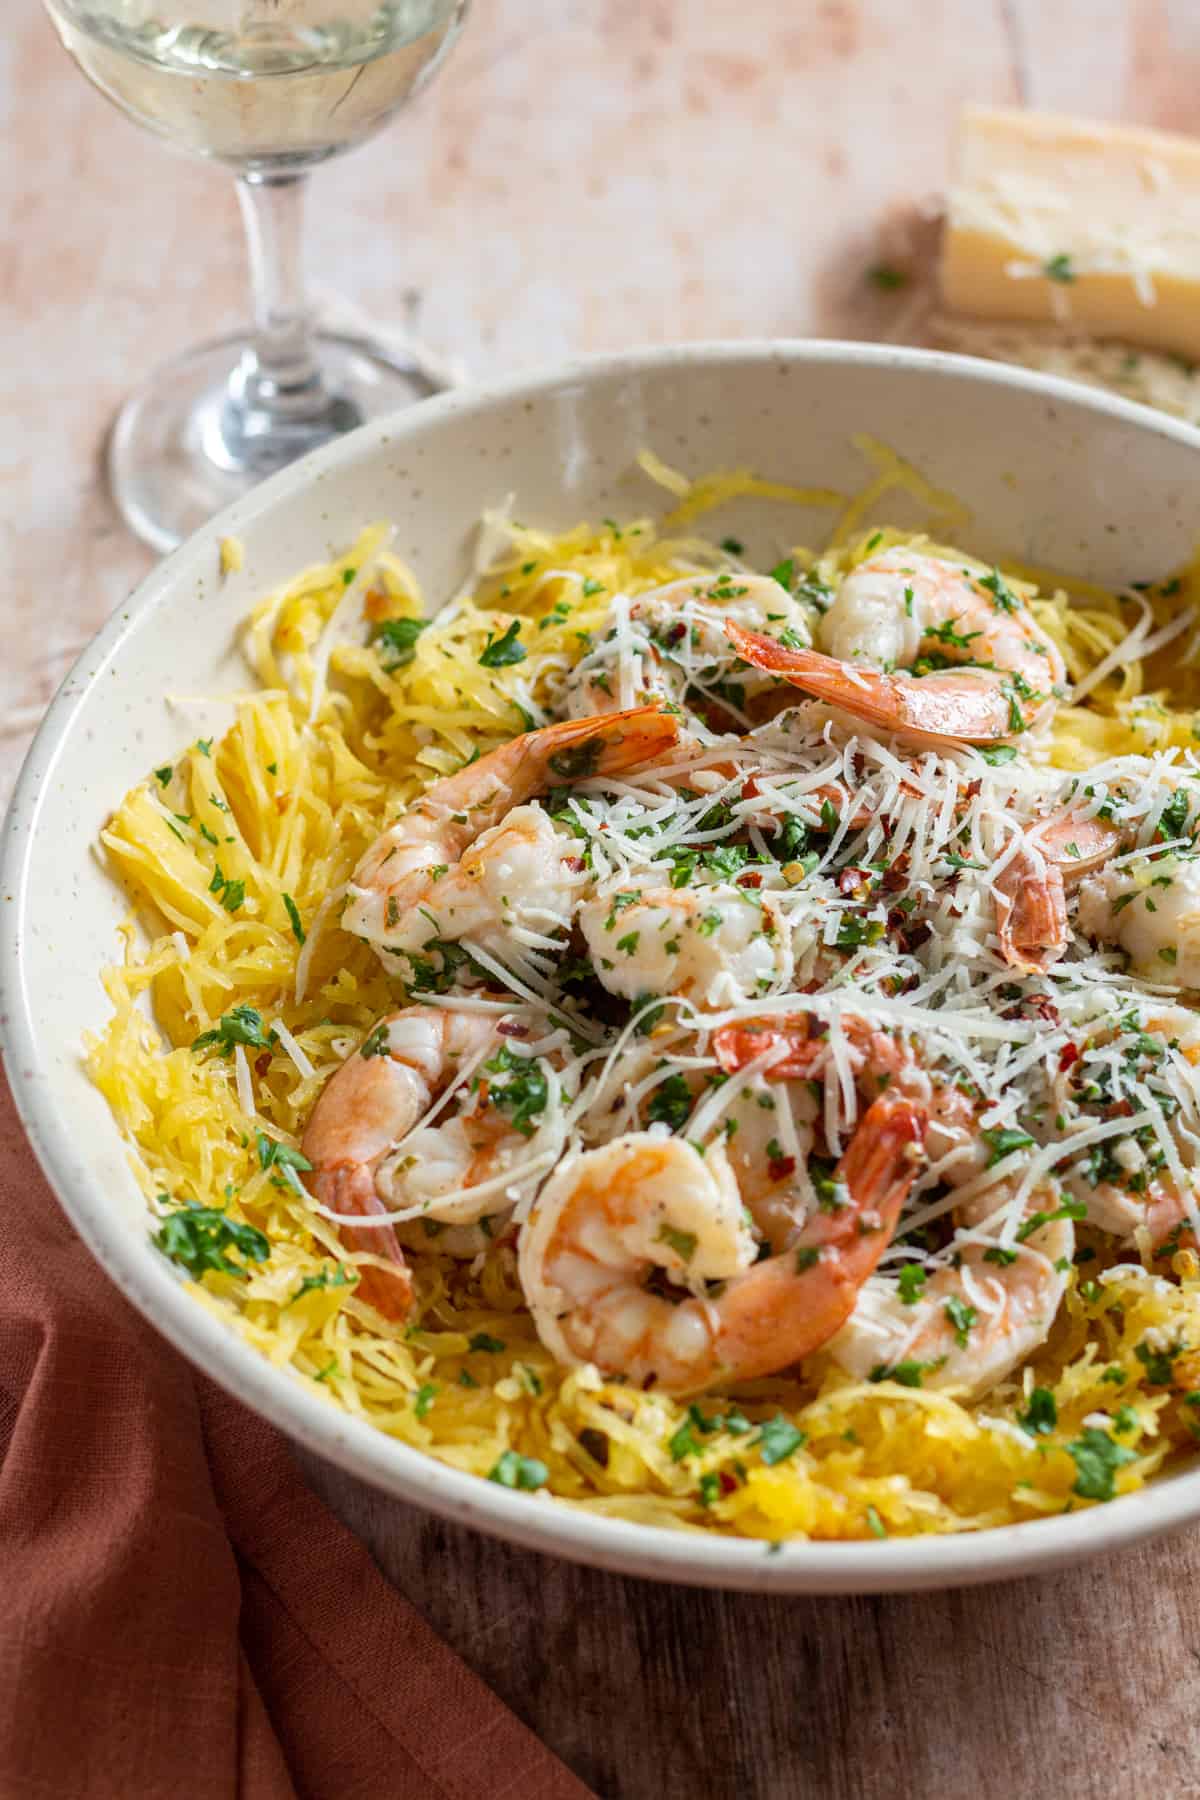 Grilled spaghetti squash shrimp scampi topped with parmesan cheese and red pepper flakes, in a bowl with a glass of white wine in the background.